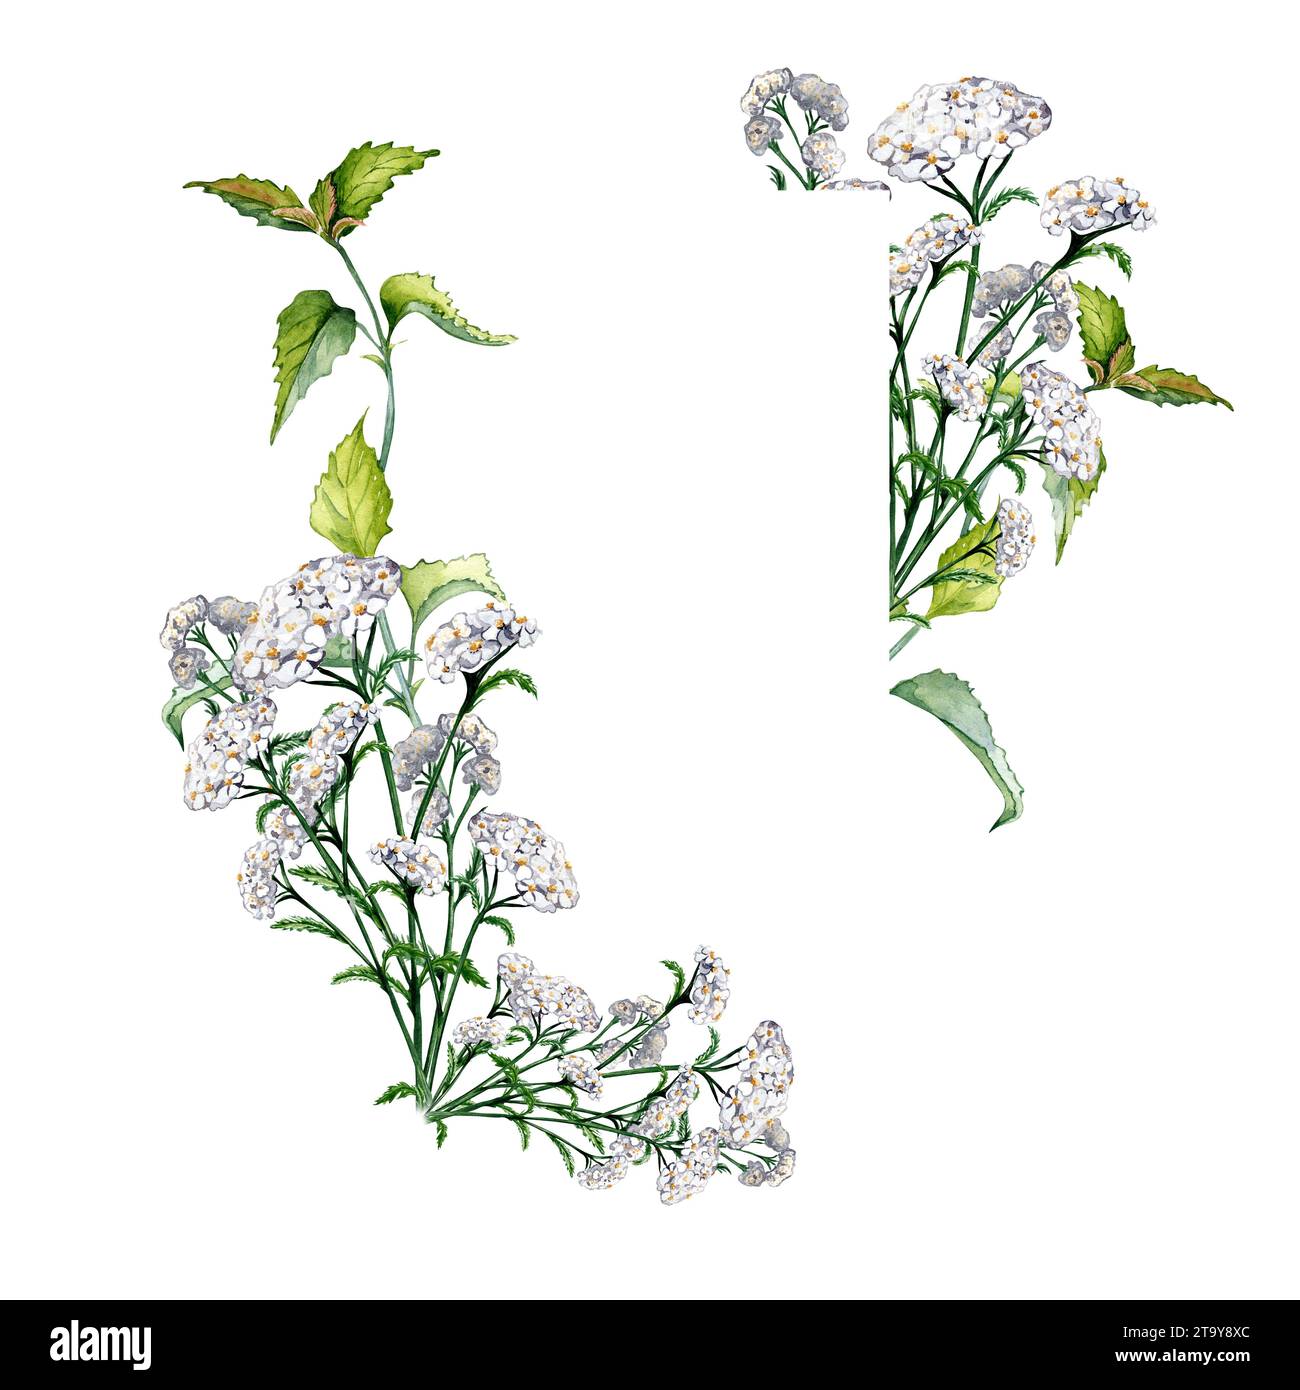 Frame with yarrow achillea, nettle, beggarticks watercolor illustration isolated on white. Medicinal flowers painted. Useful herbs, medicinal plants h Stock Photo